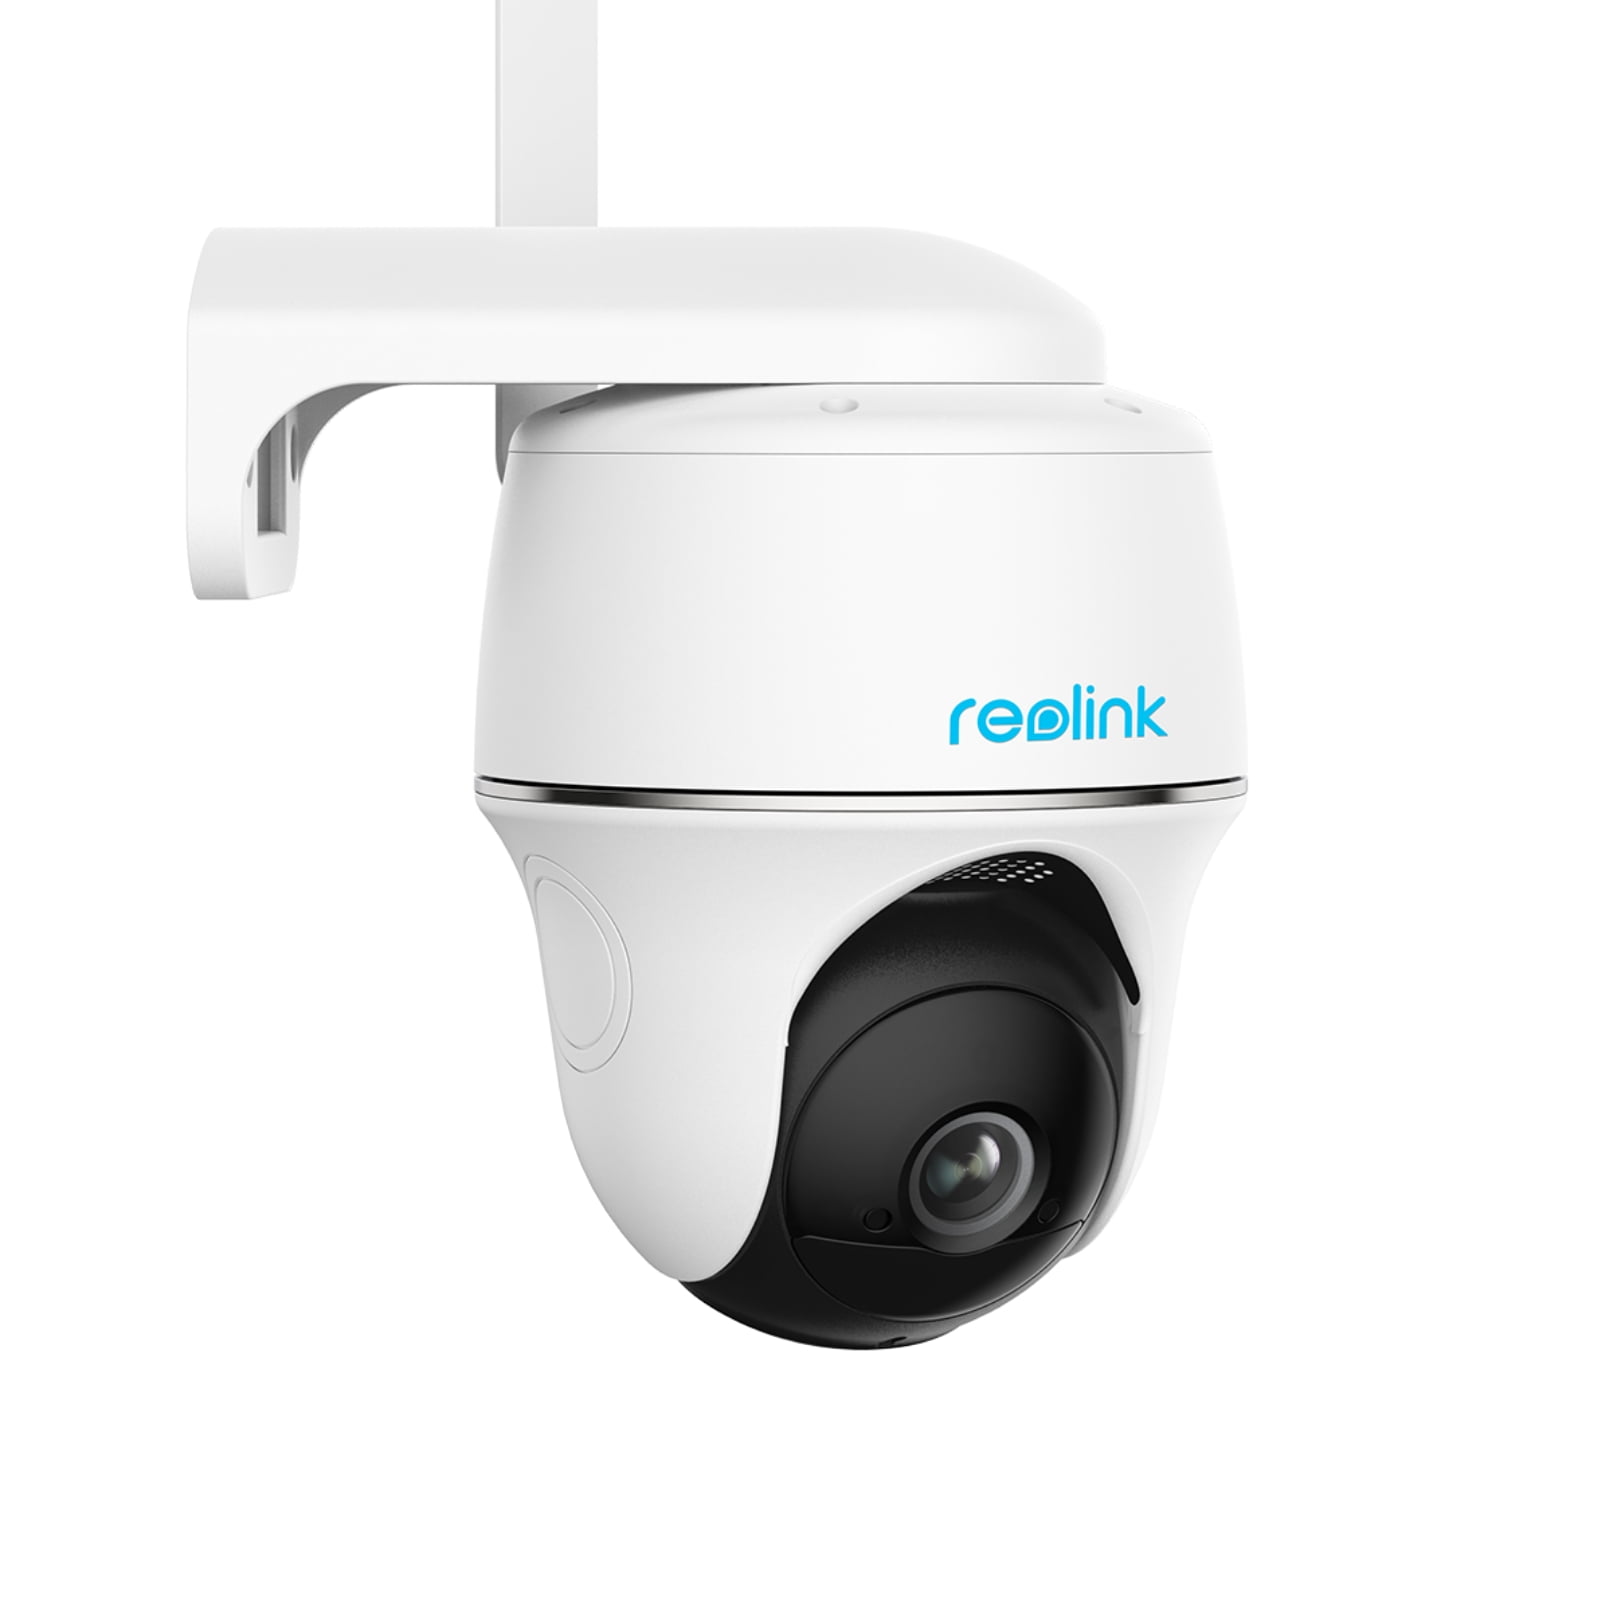 REOLINK 4MP 3G/4G LTE Outdoor Wireless Battery-Powered Security Camera,  Smart Person/Vehicle Detection, 355°/140° Pan &Tilt, 2-Way Talk, Go PT Plus  -US Version